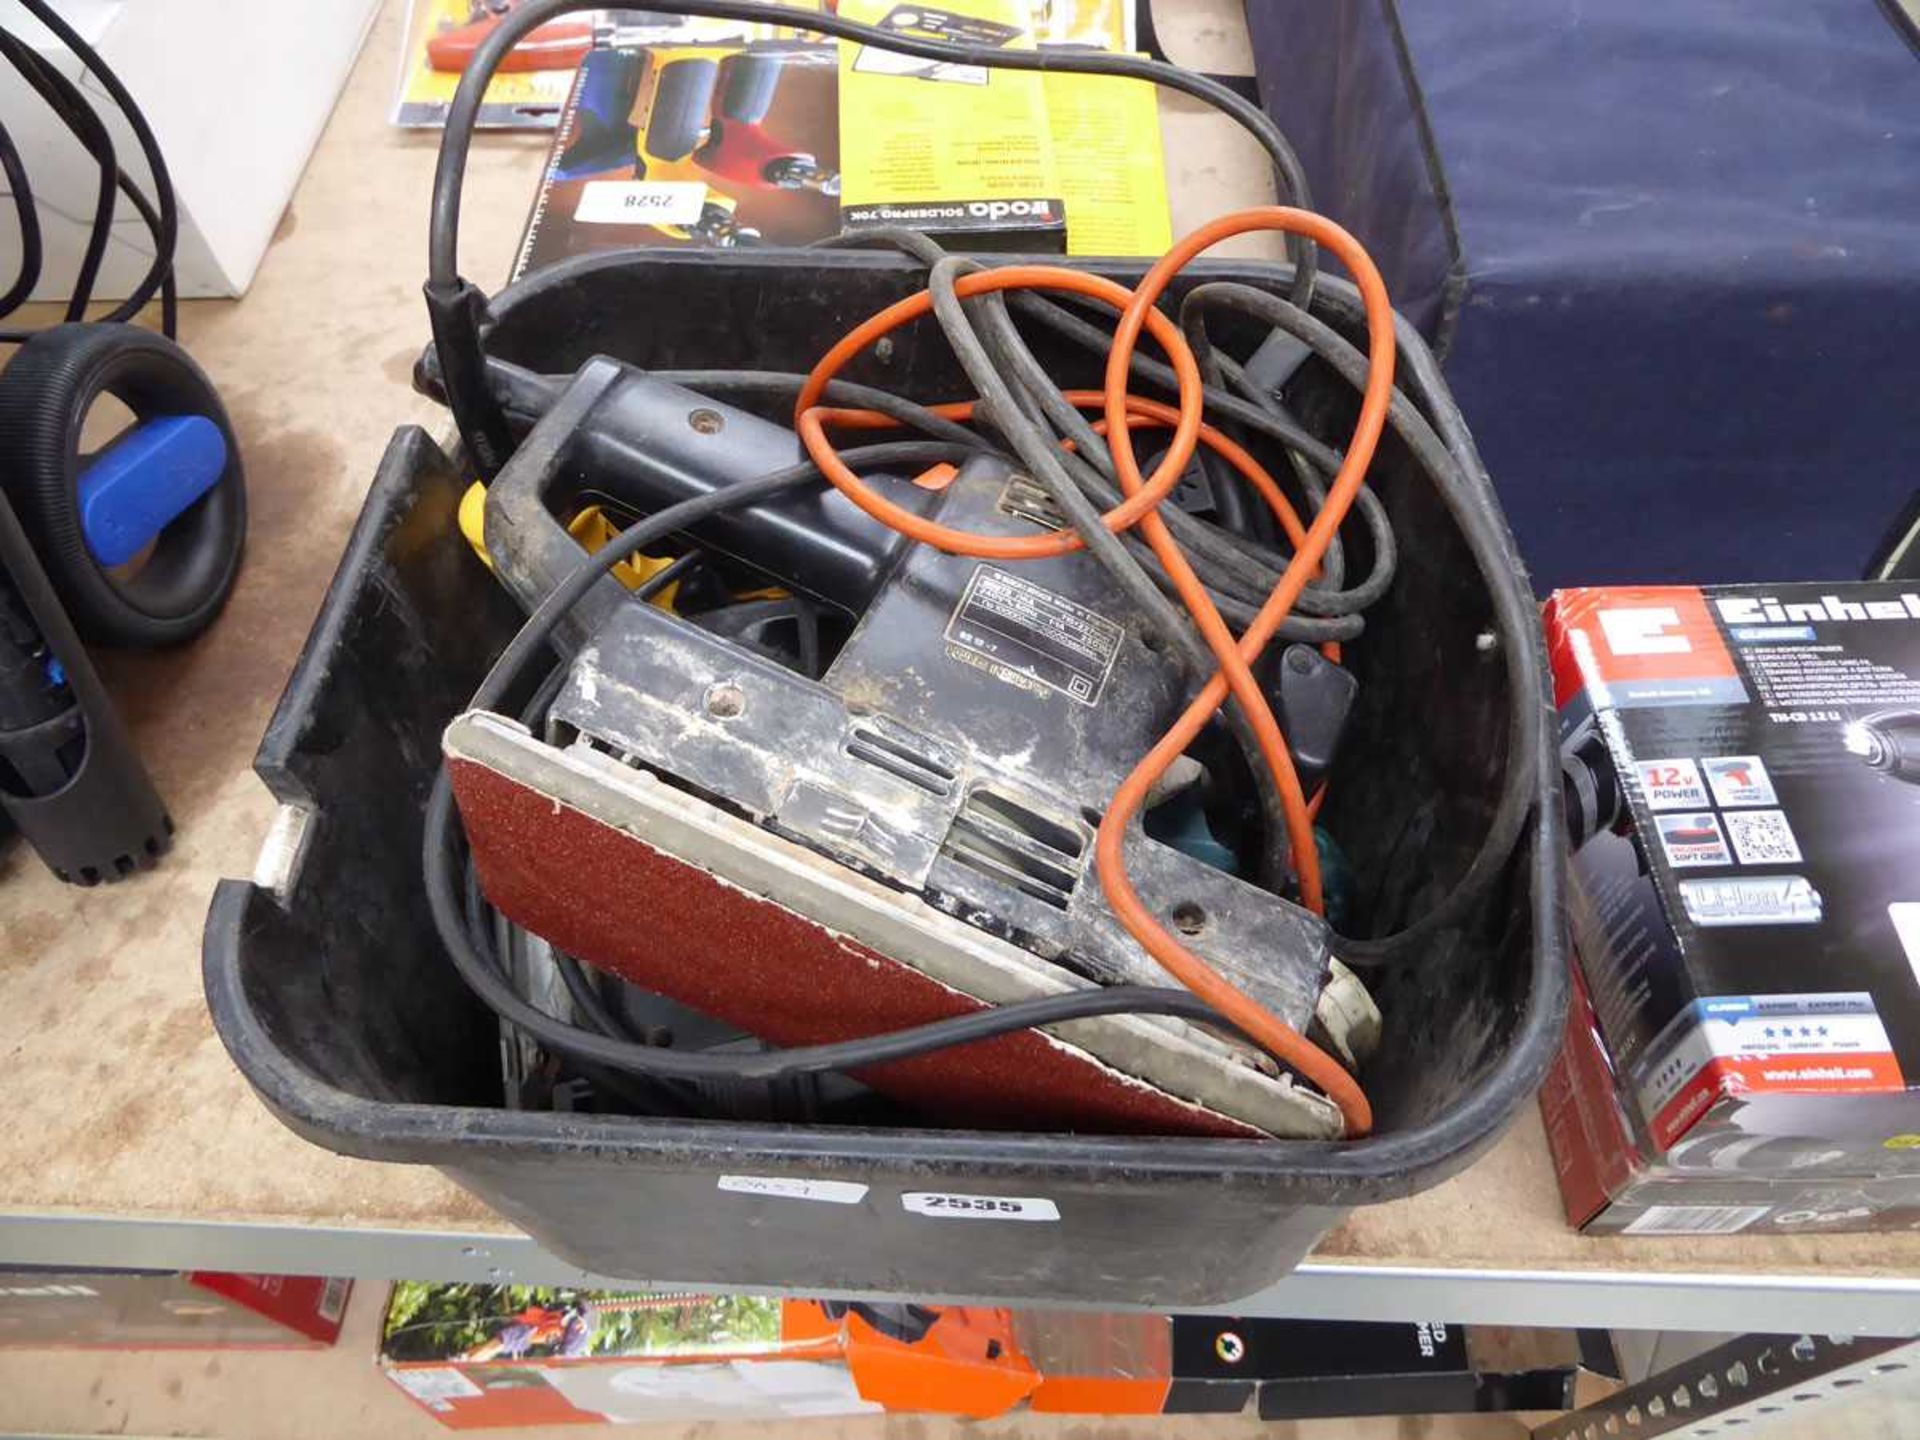 Crate containing mixed electrical tooling incl. jig saw, sander, etc.